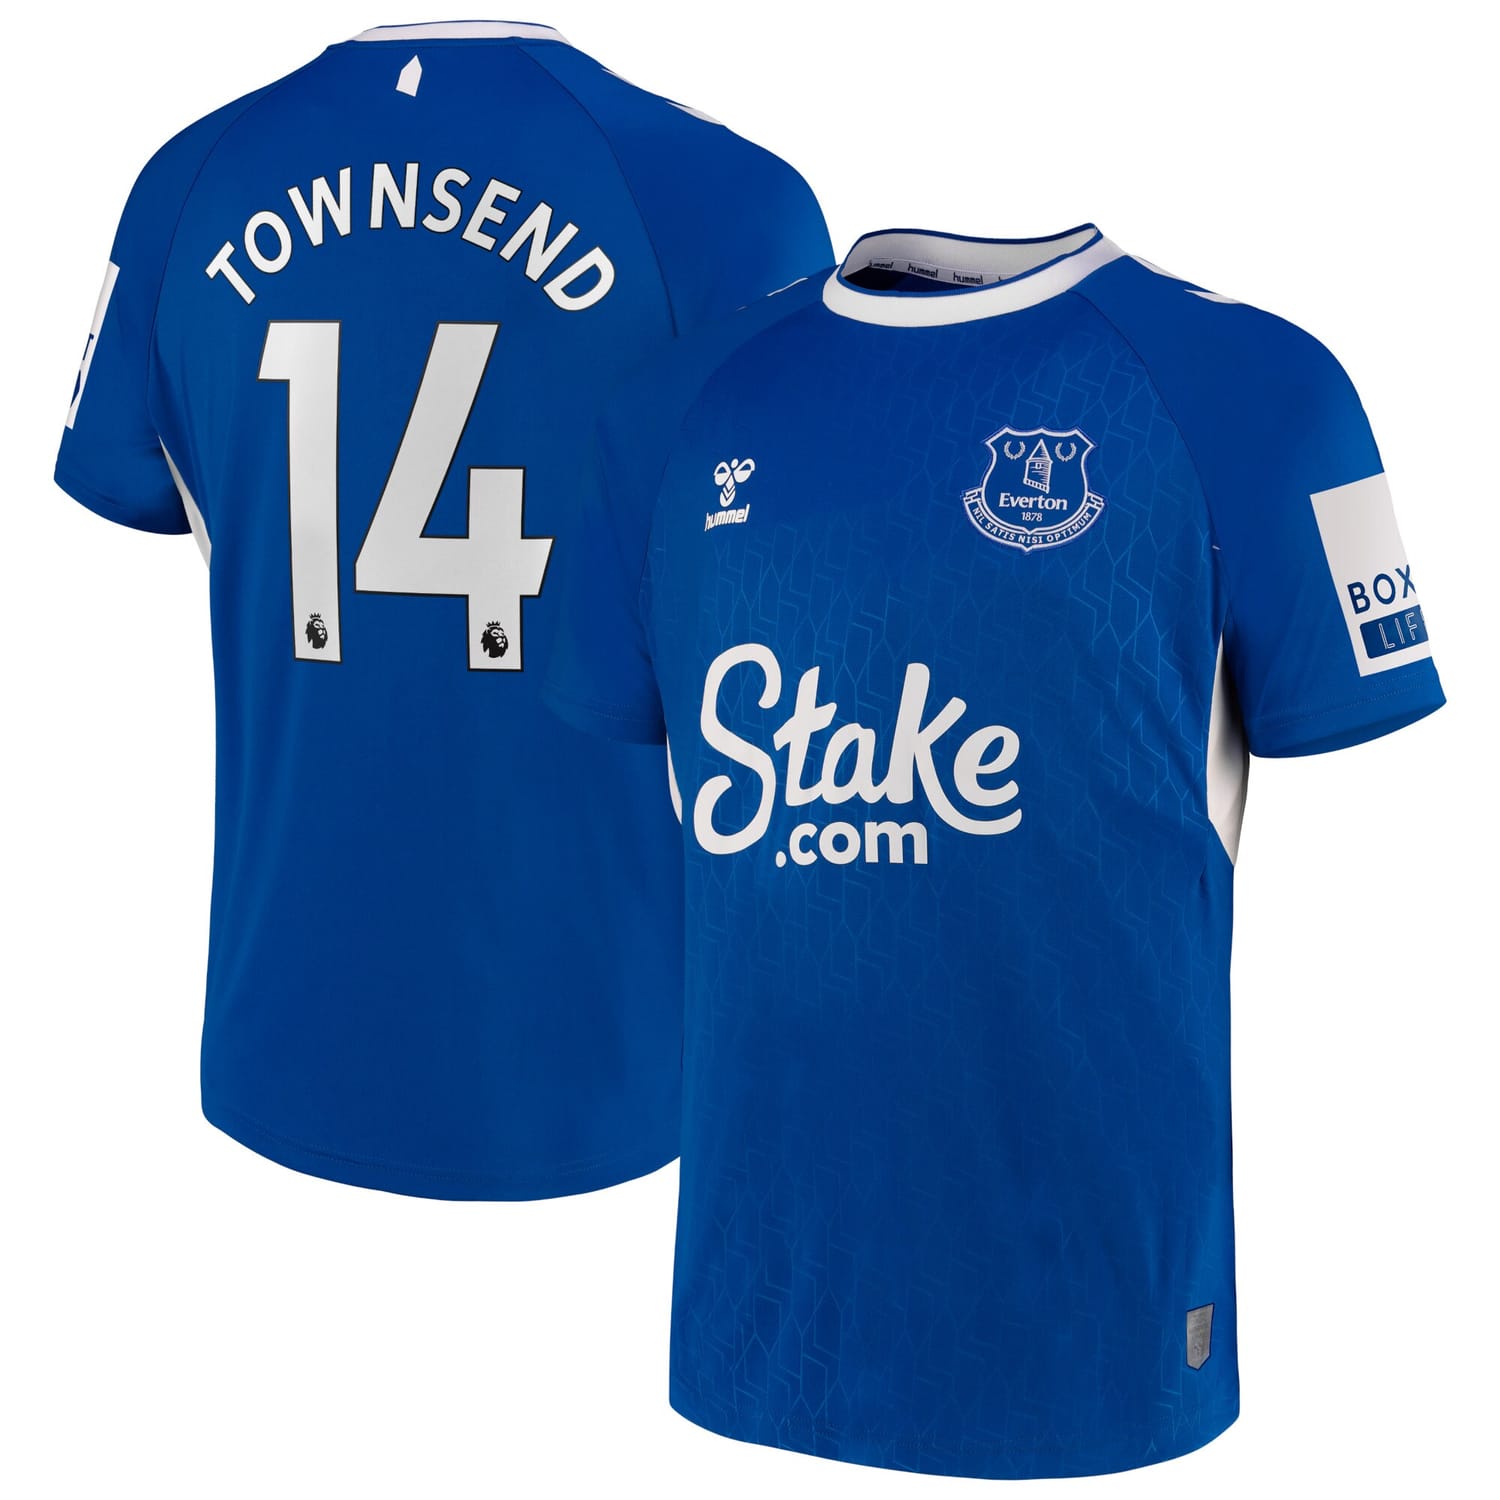 Premier League Everton Home Jersey Shirt 2022-23 player Andros Townsend 14 printing for Men